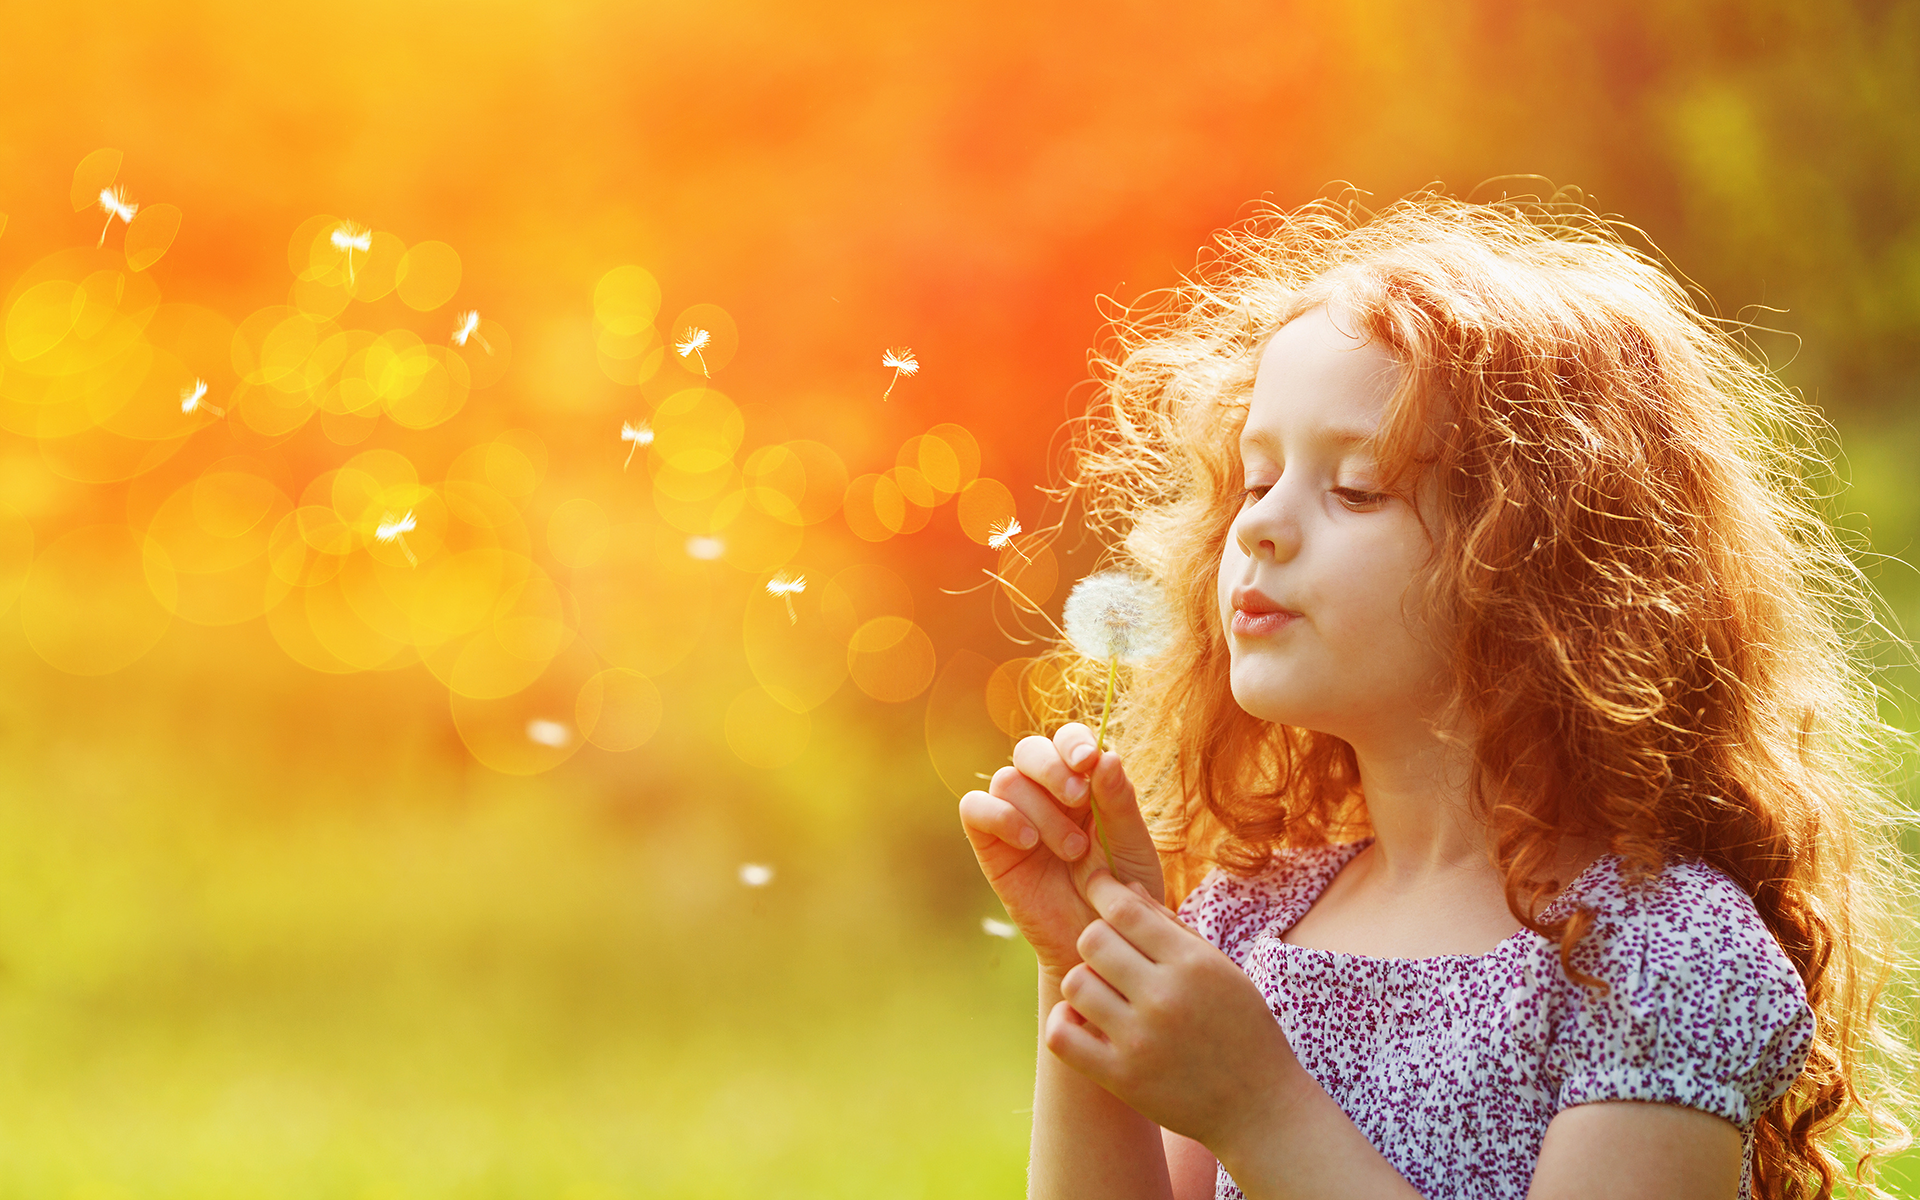 Research Shows Mindful Breathing Can Help Kids Find Calm—Photo of a red-headed little girl outdoors blowing the seeds of a dandelion.